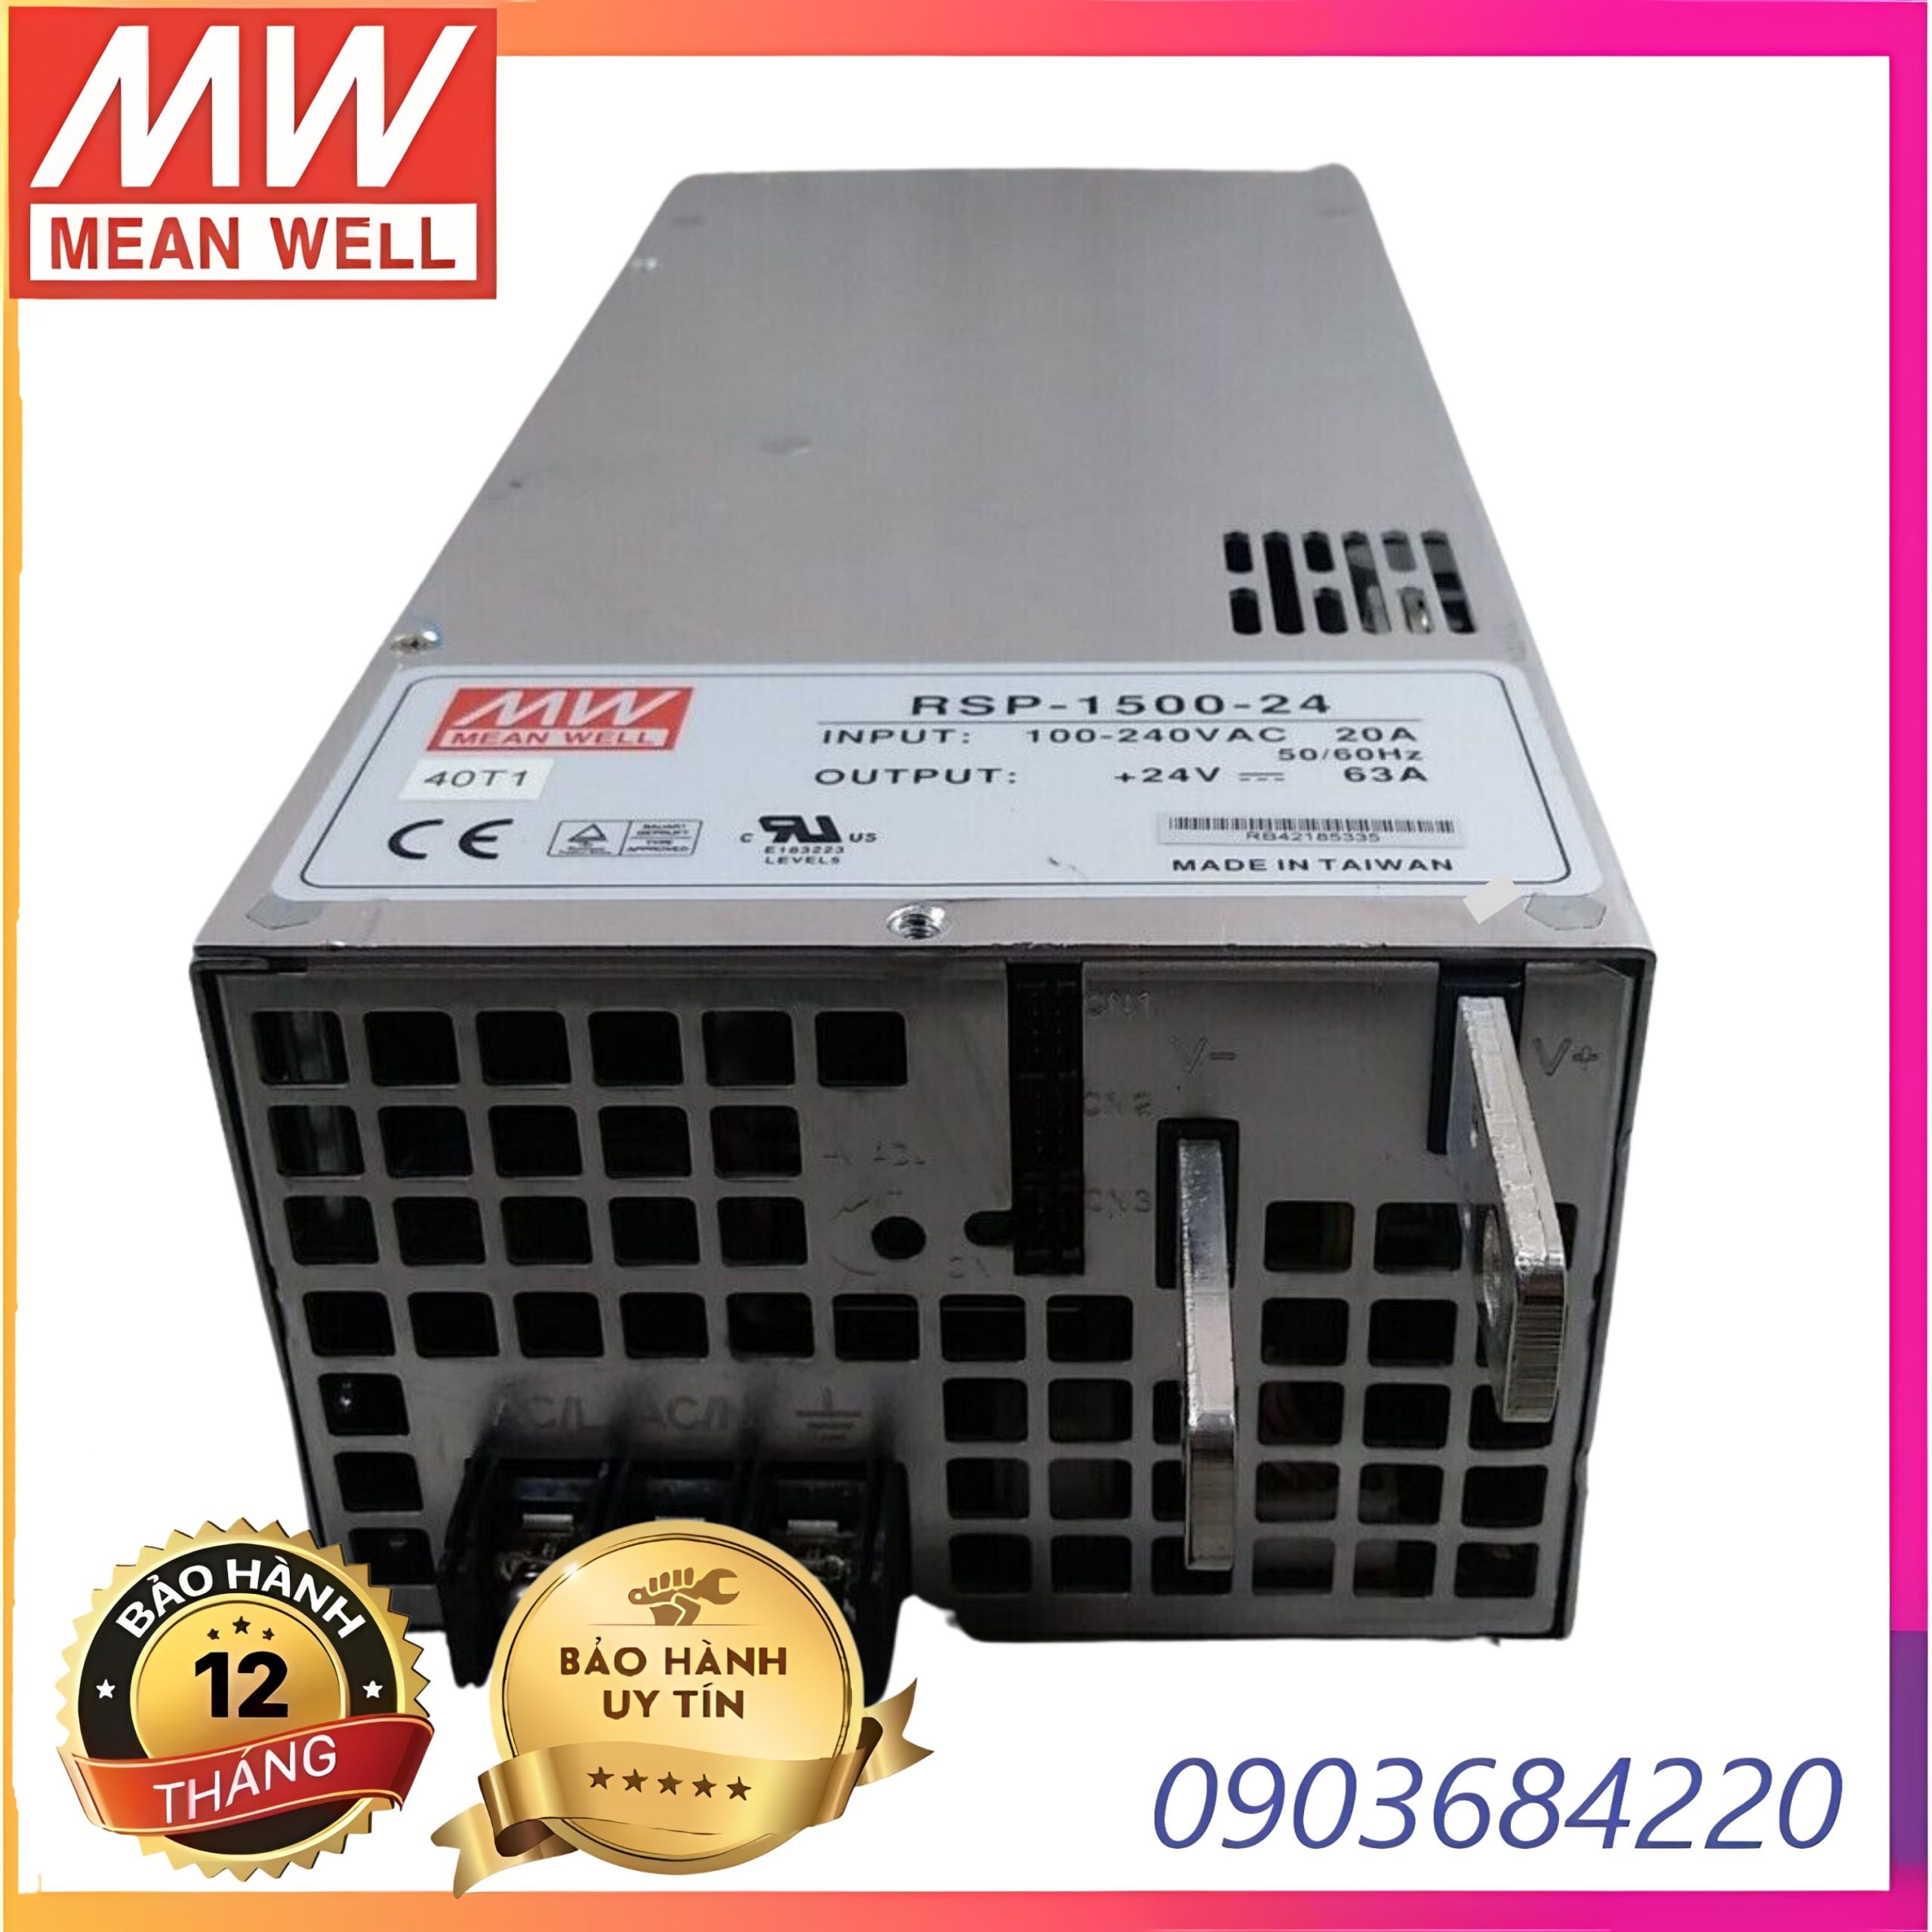 Nguồn tổ ong Meanwell RSP-1500-24 (1500W 24V 63A)